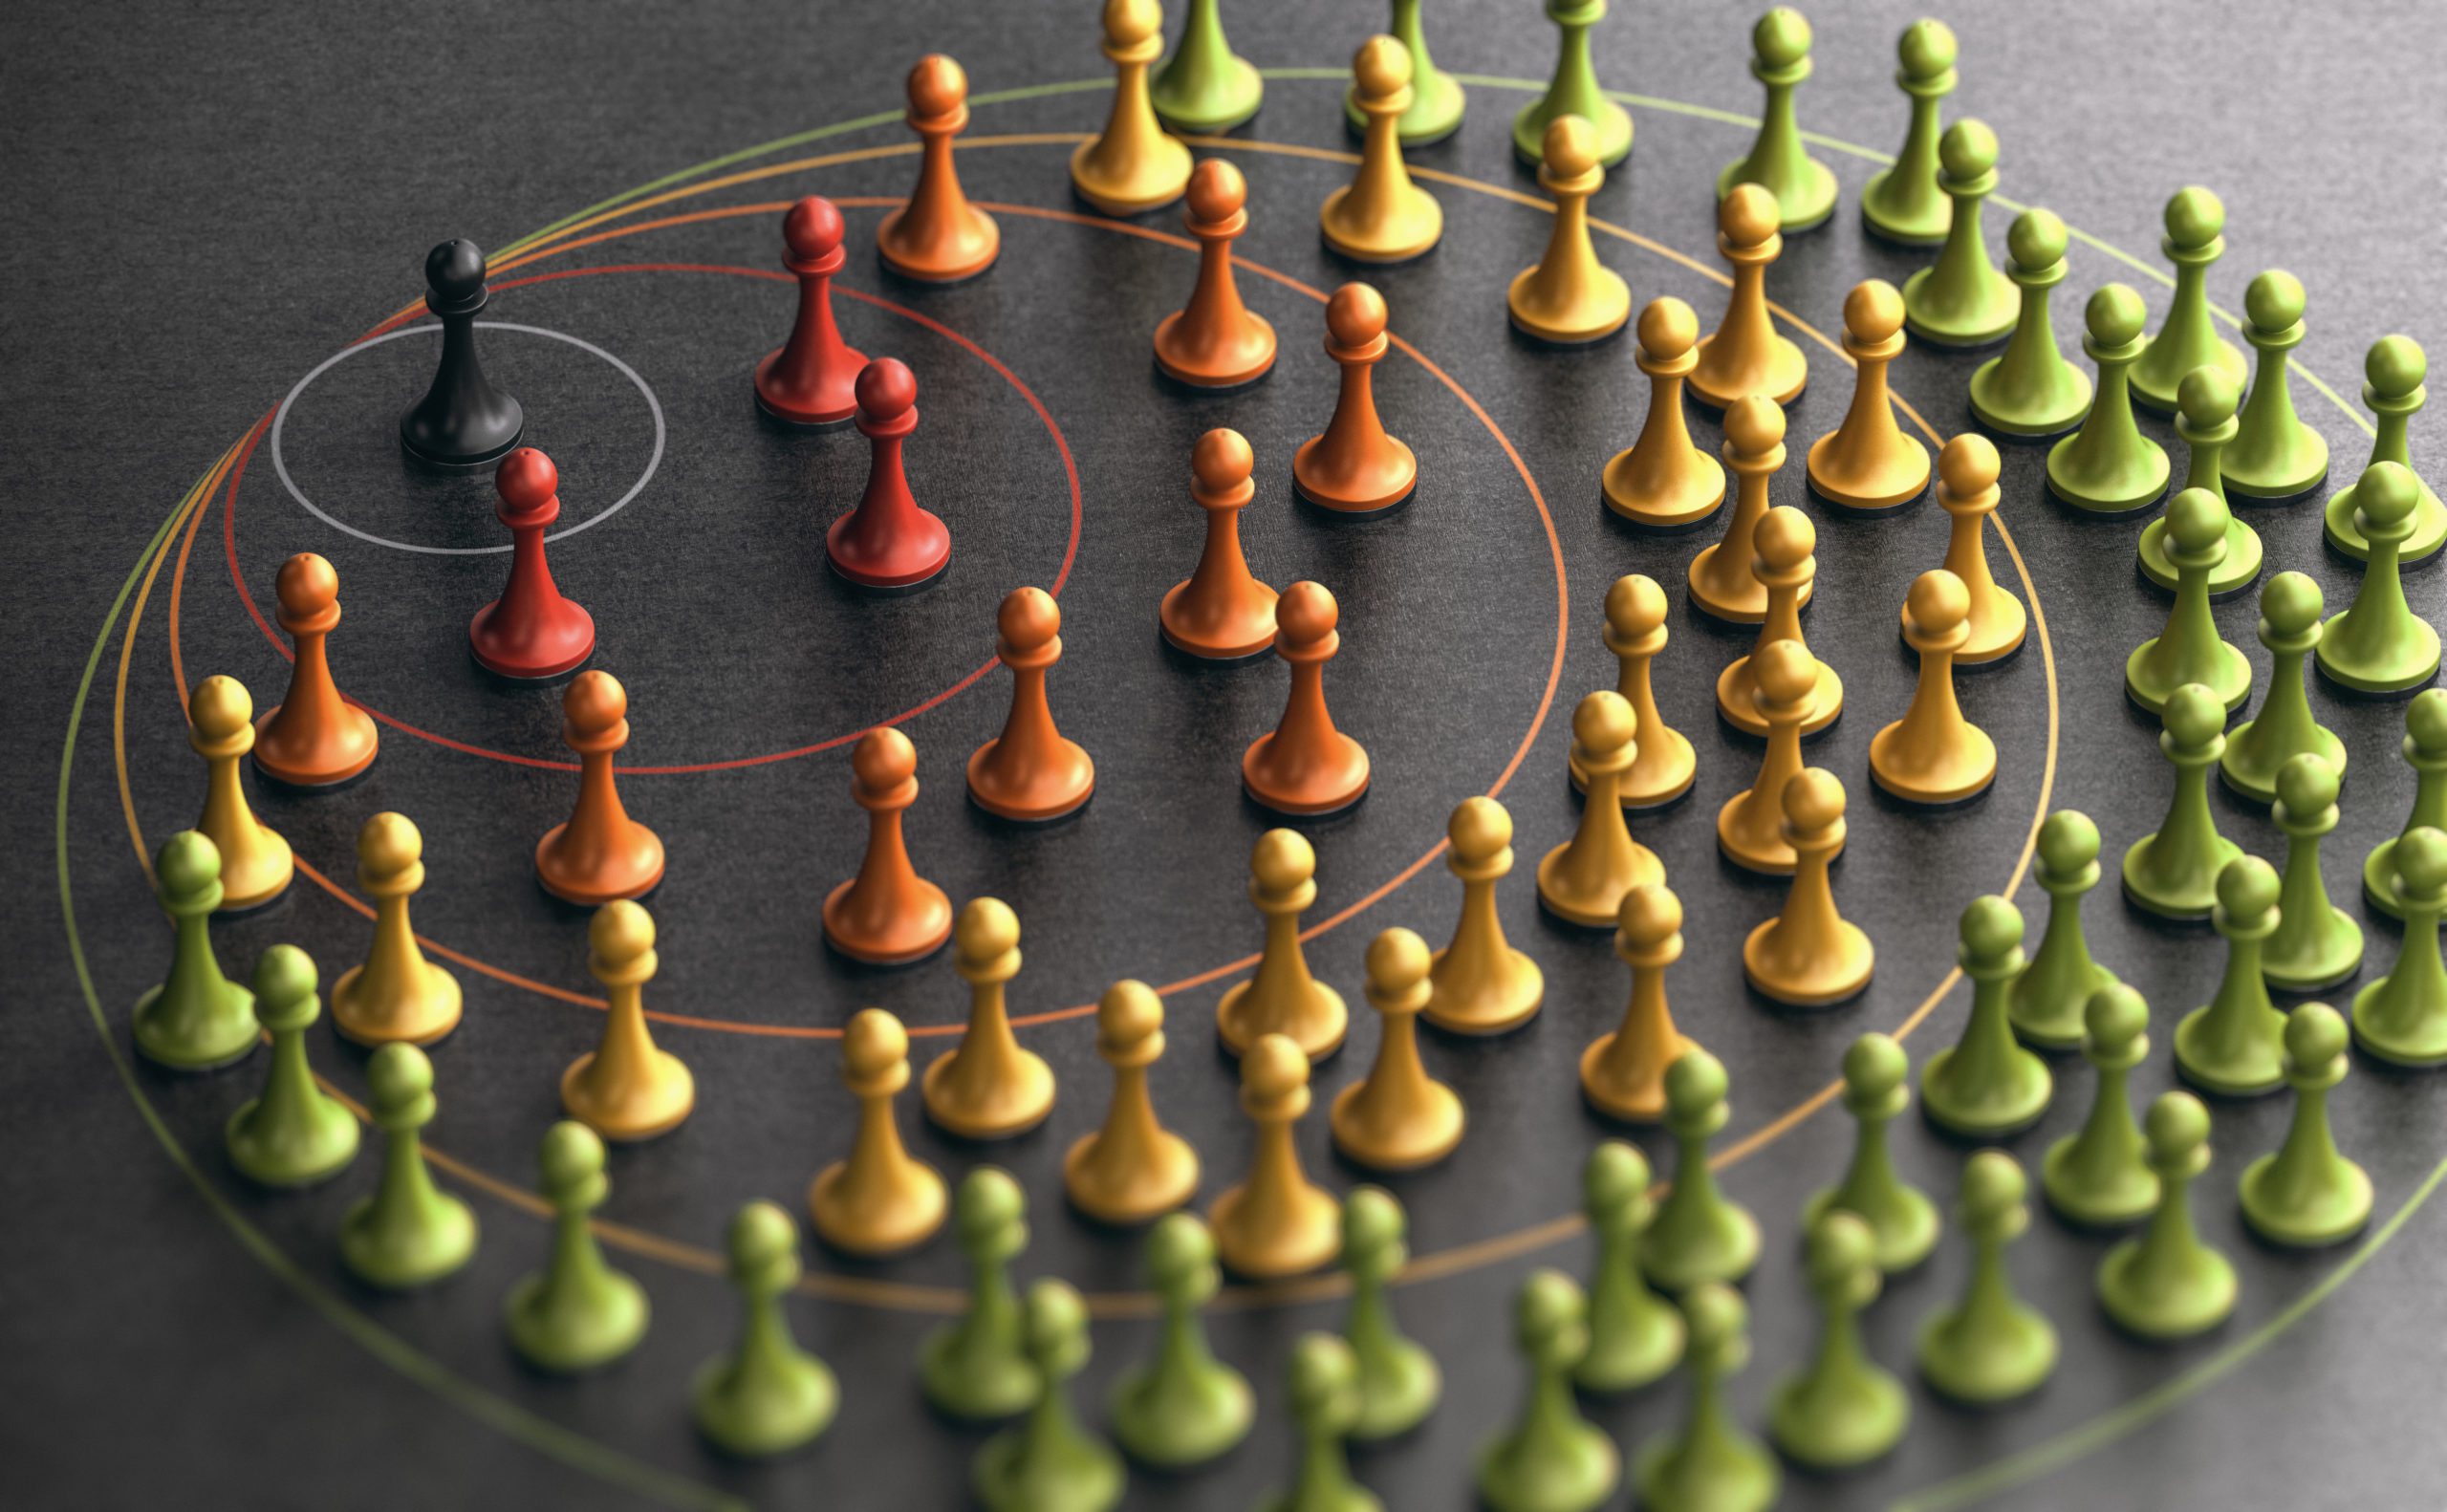 3D illustration of pawns over black background with circles. Concept of influencer marketing and spheres of influence.